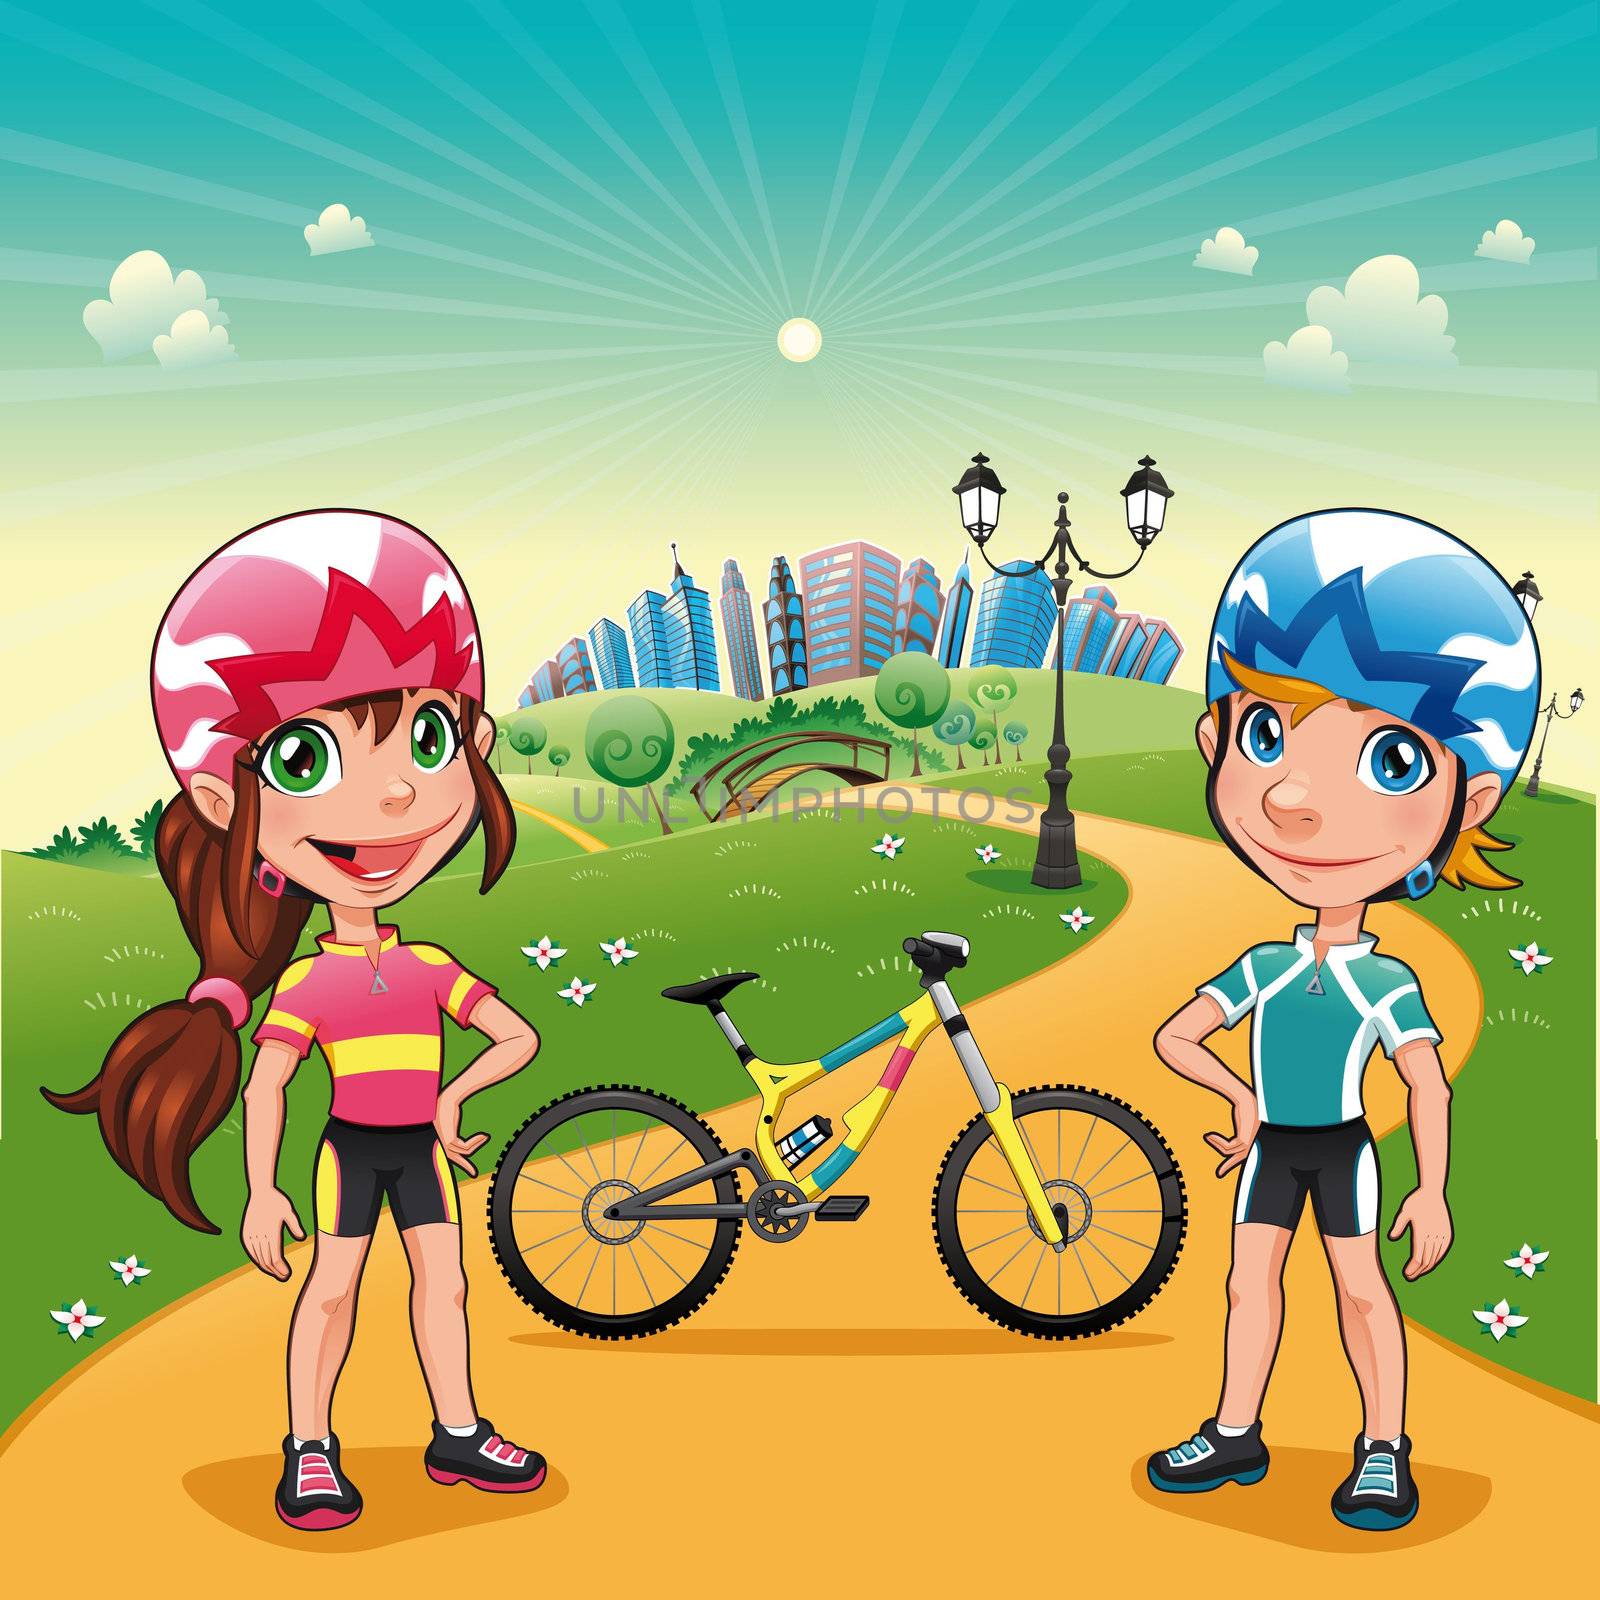 Park with young bikers. Funny cartoon and vector scene.

